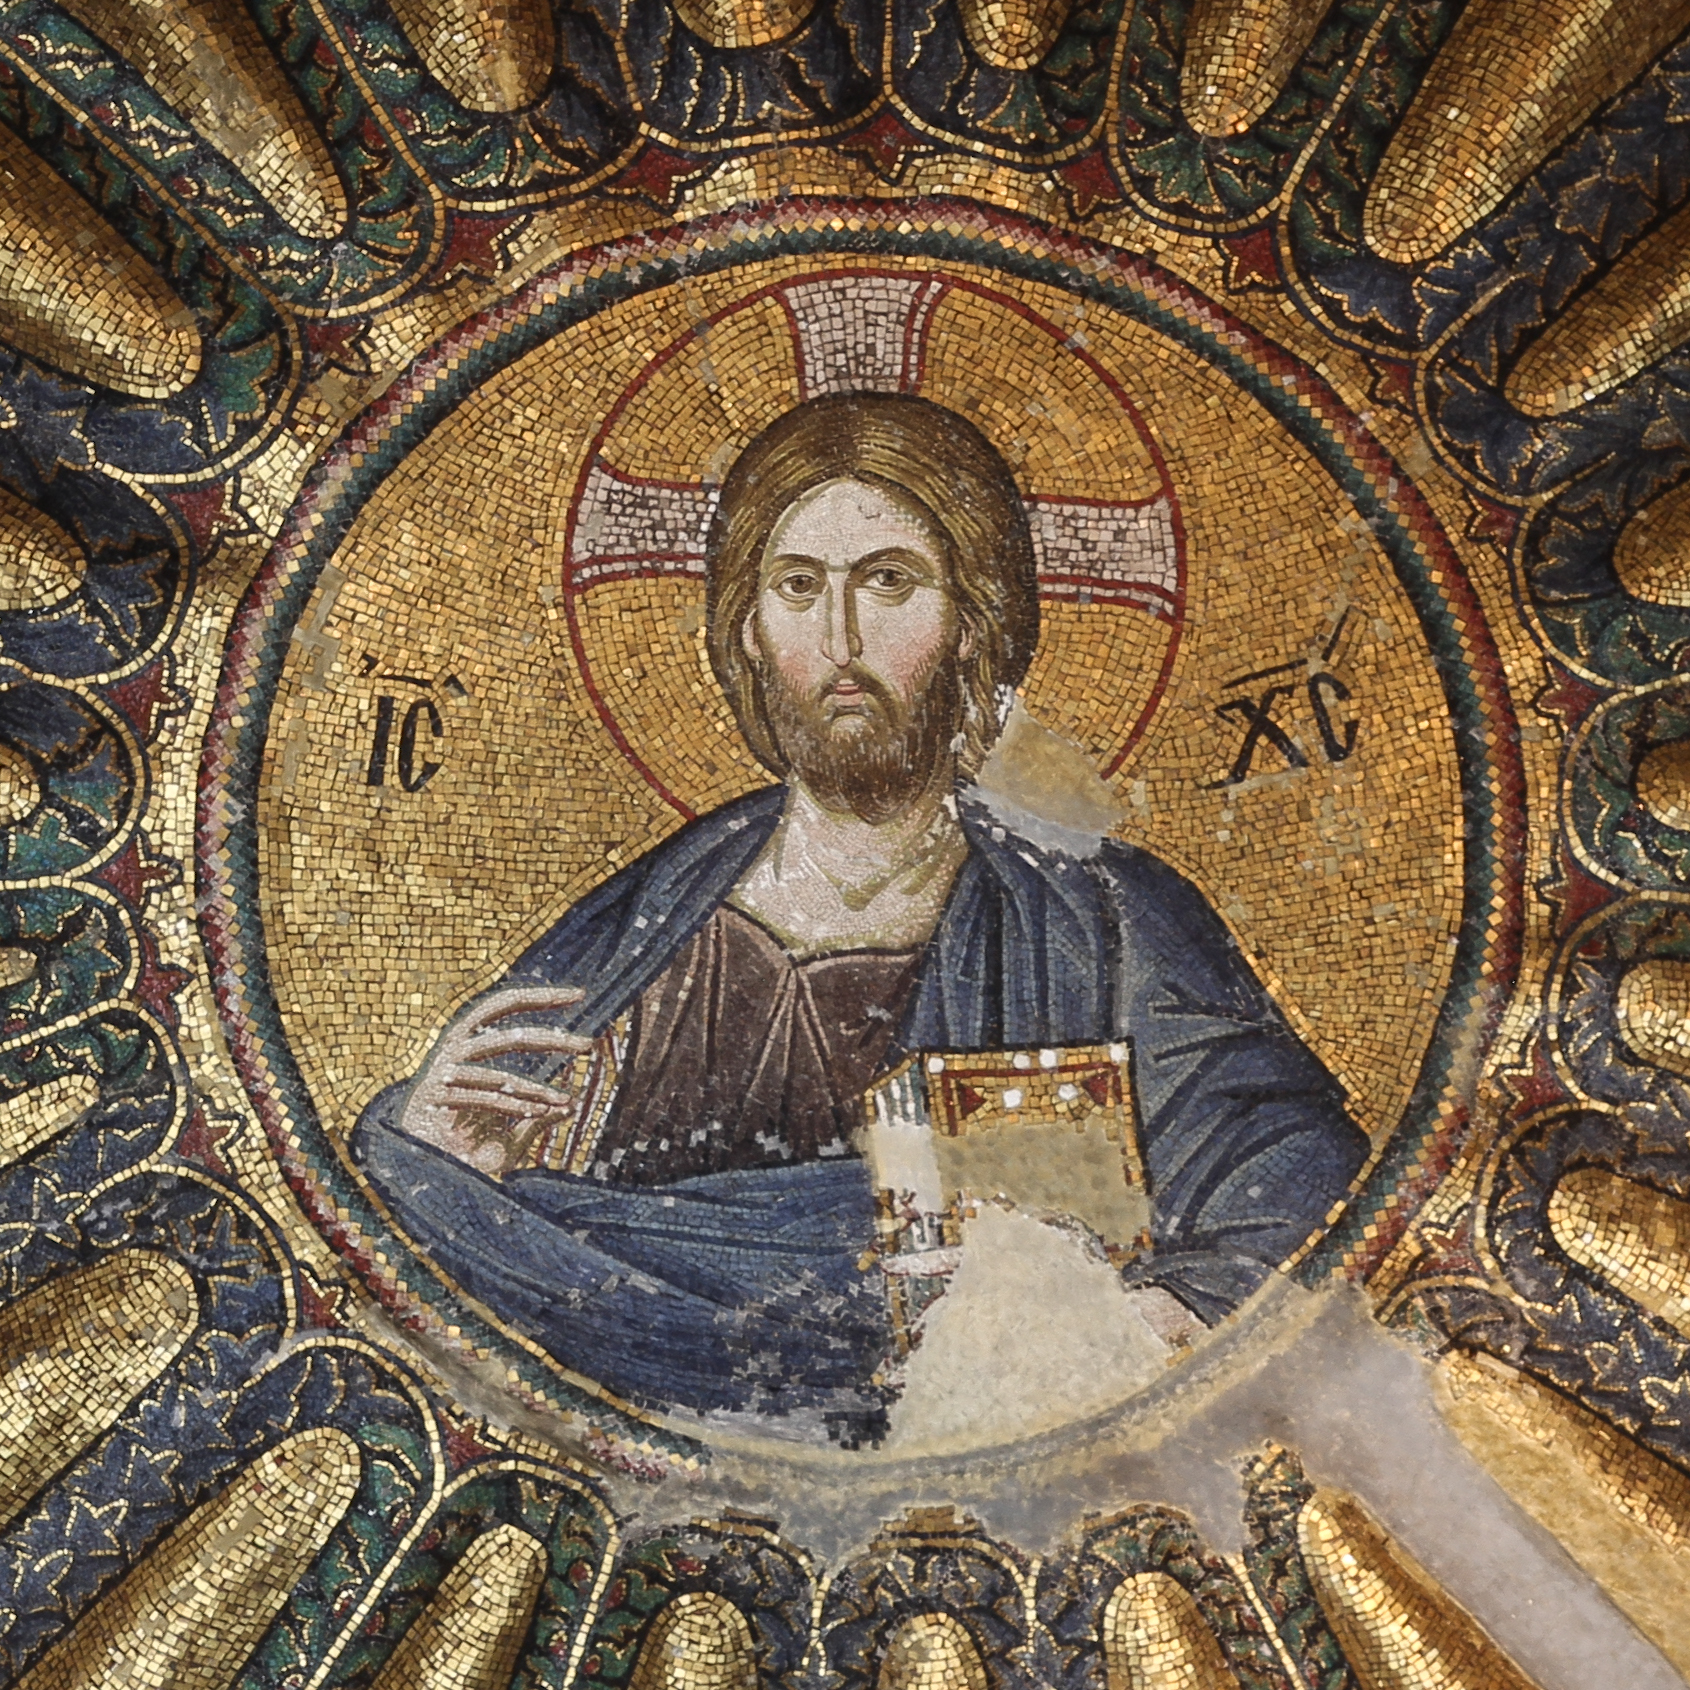 Mosaic of Christ Pantocrator, south dome of inner narthex at Chora Church (prior to 1320), Istanbul, Turkey.